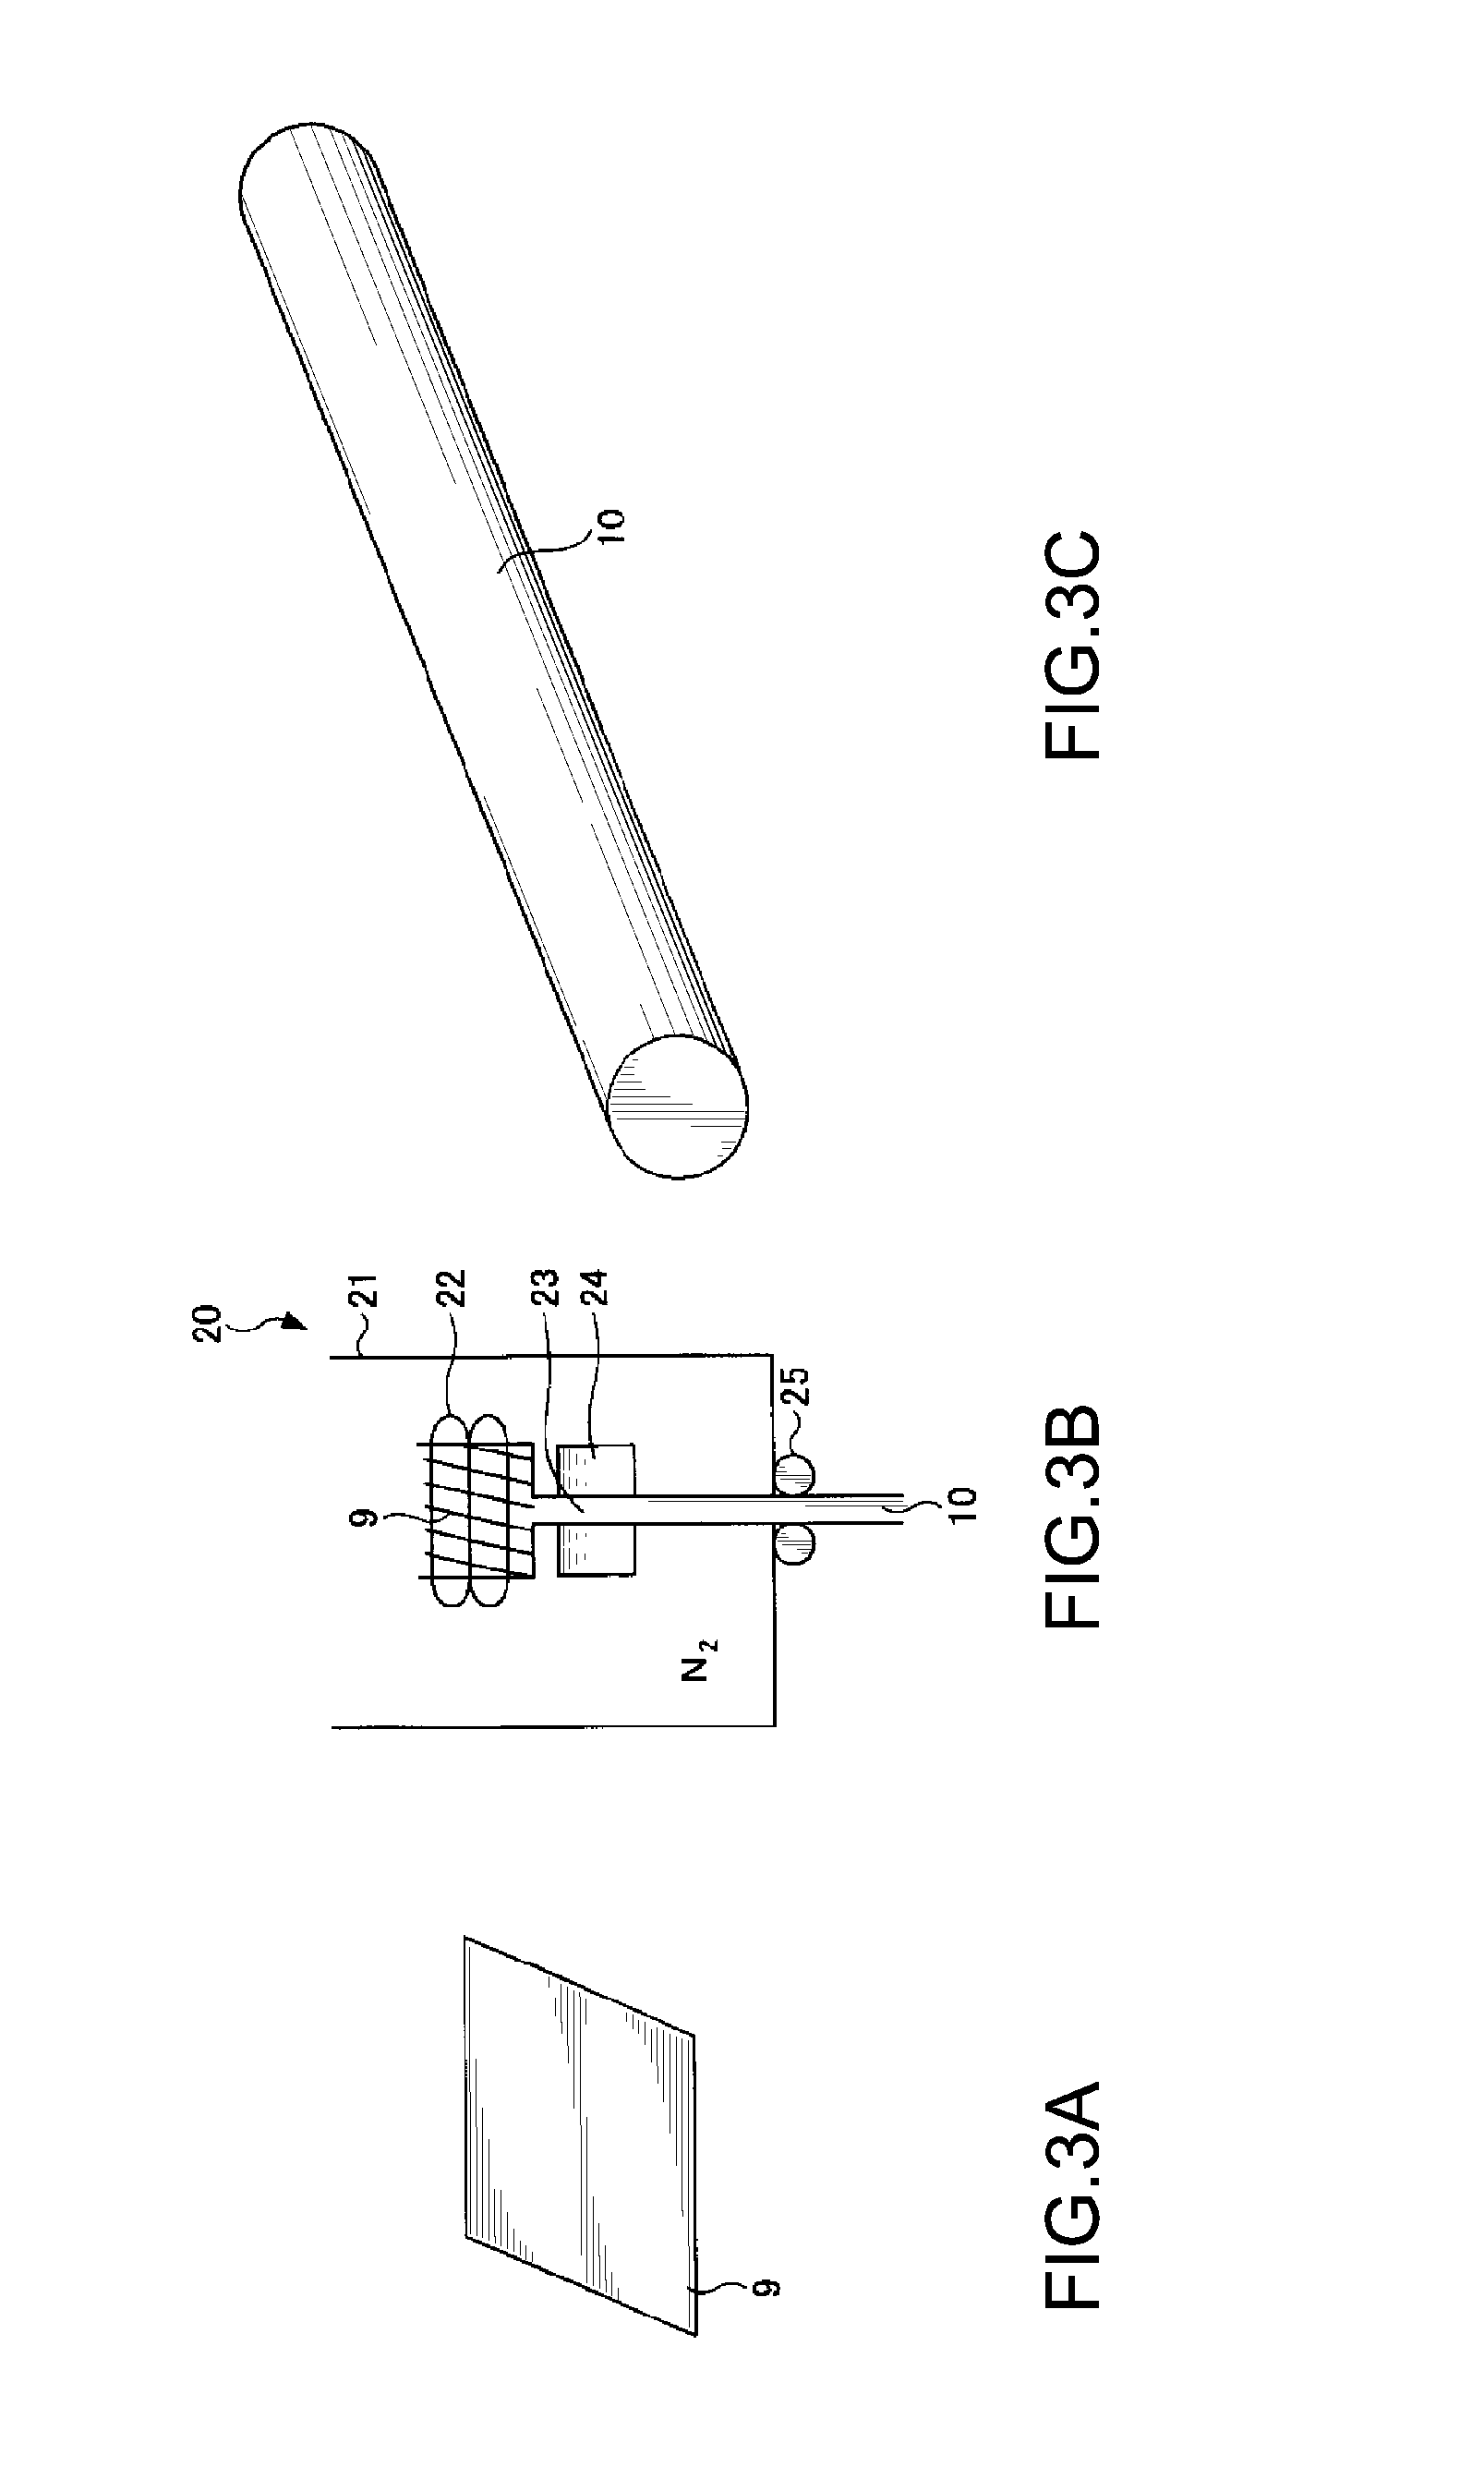 Bonding wire and method for manufacturing same